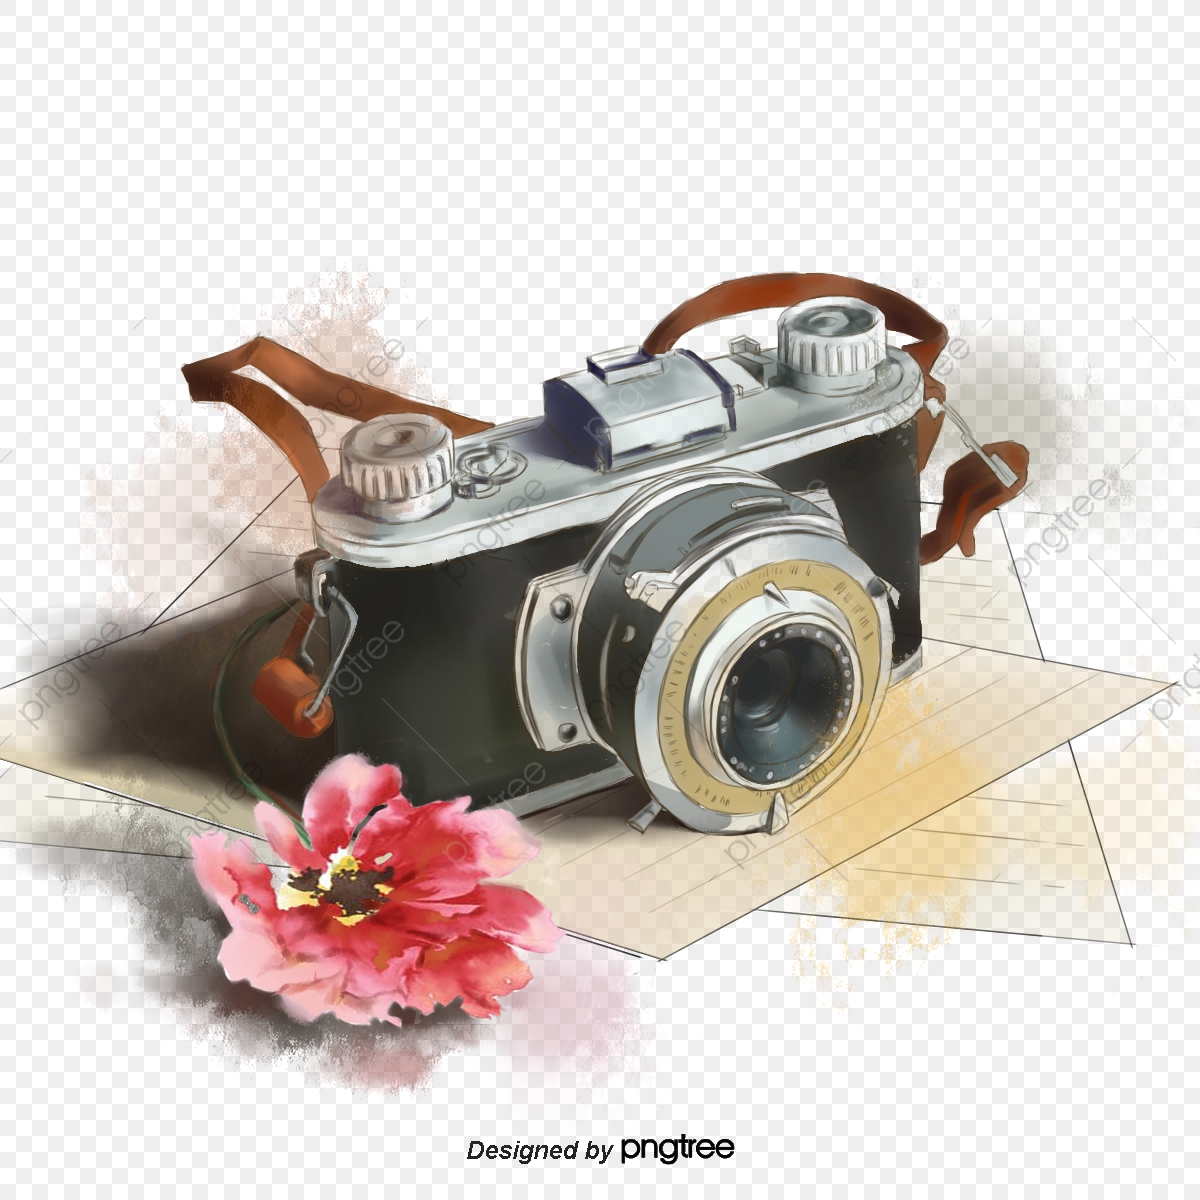 Flower elements of hand. Photograph clipart travel camera